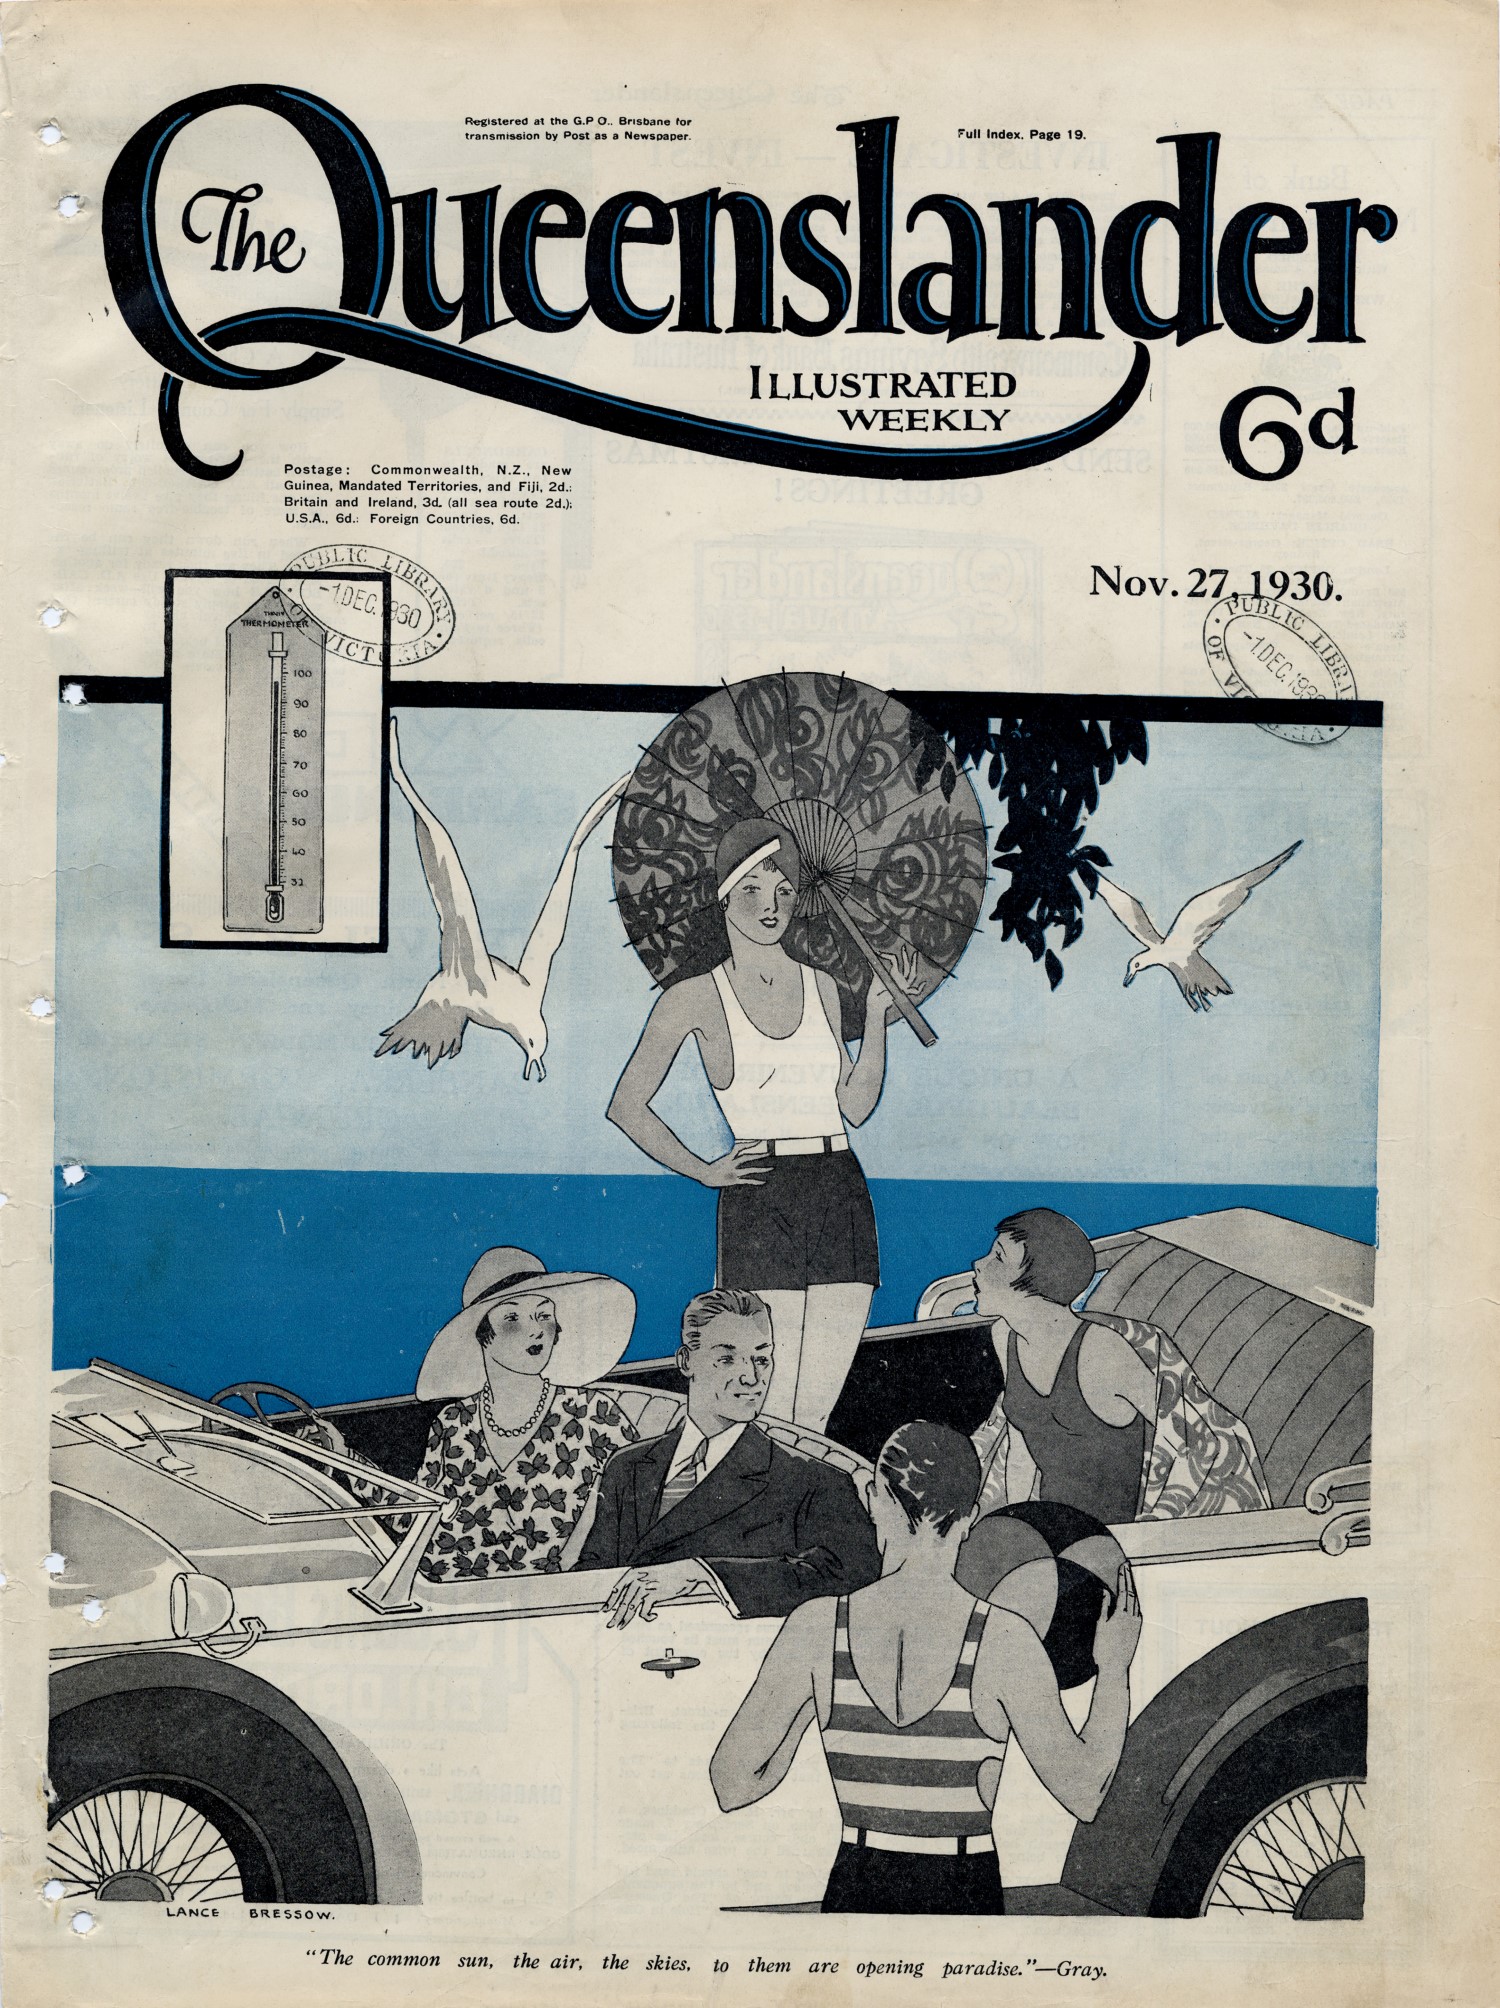 Illustrated front cover of the newspaper "The Queenslander" 27 November 1930.